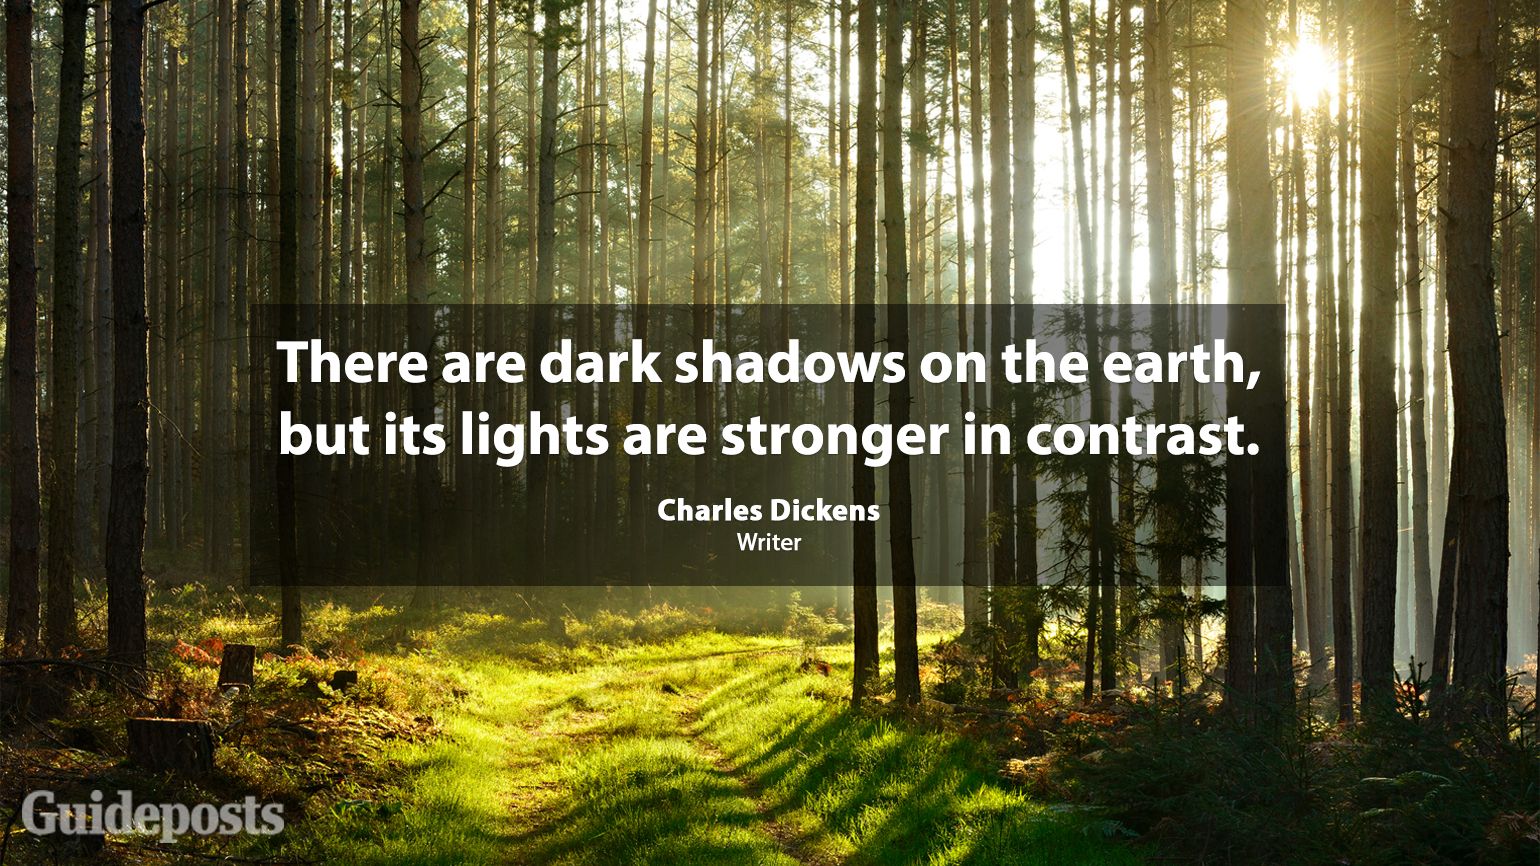 There are dark shadows on the earth, but its lights are stronger in contrast